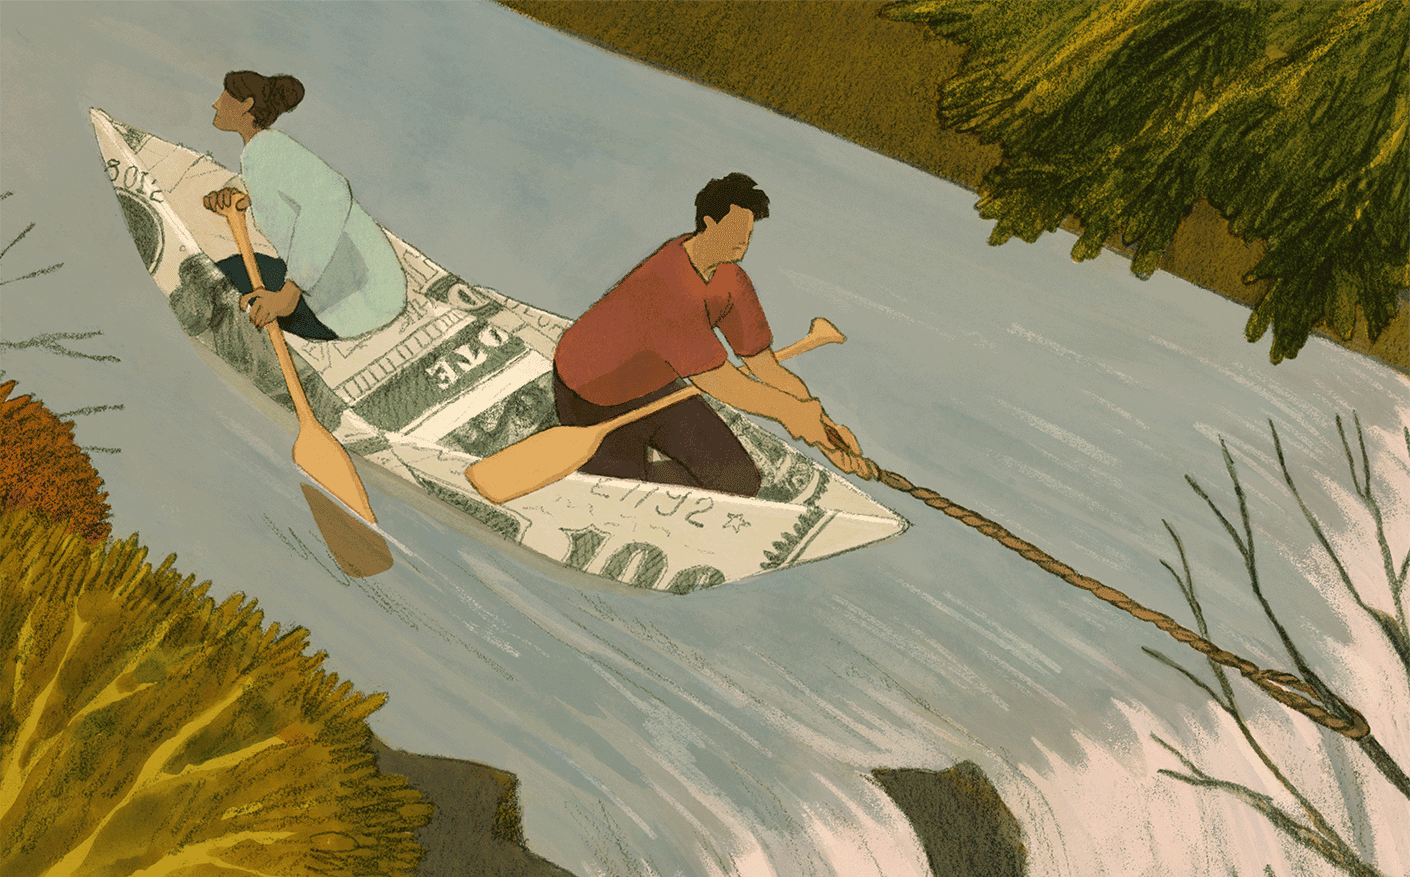 financial unity - An illustration of a husband and wife in a paper boat. The wife tries to row upstream while the husband ties a rope to a tree downstream.